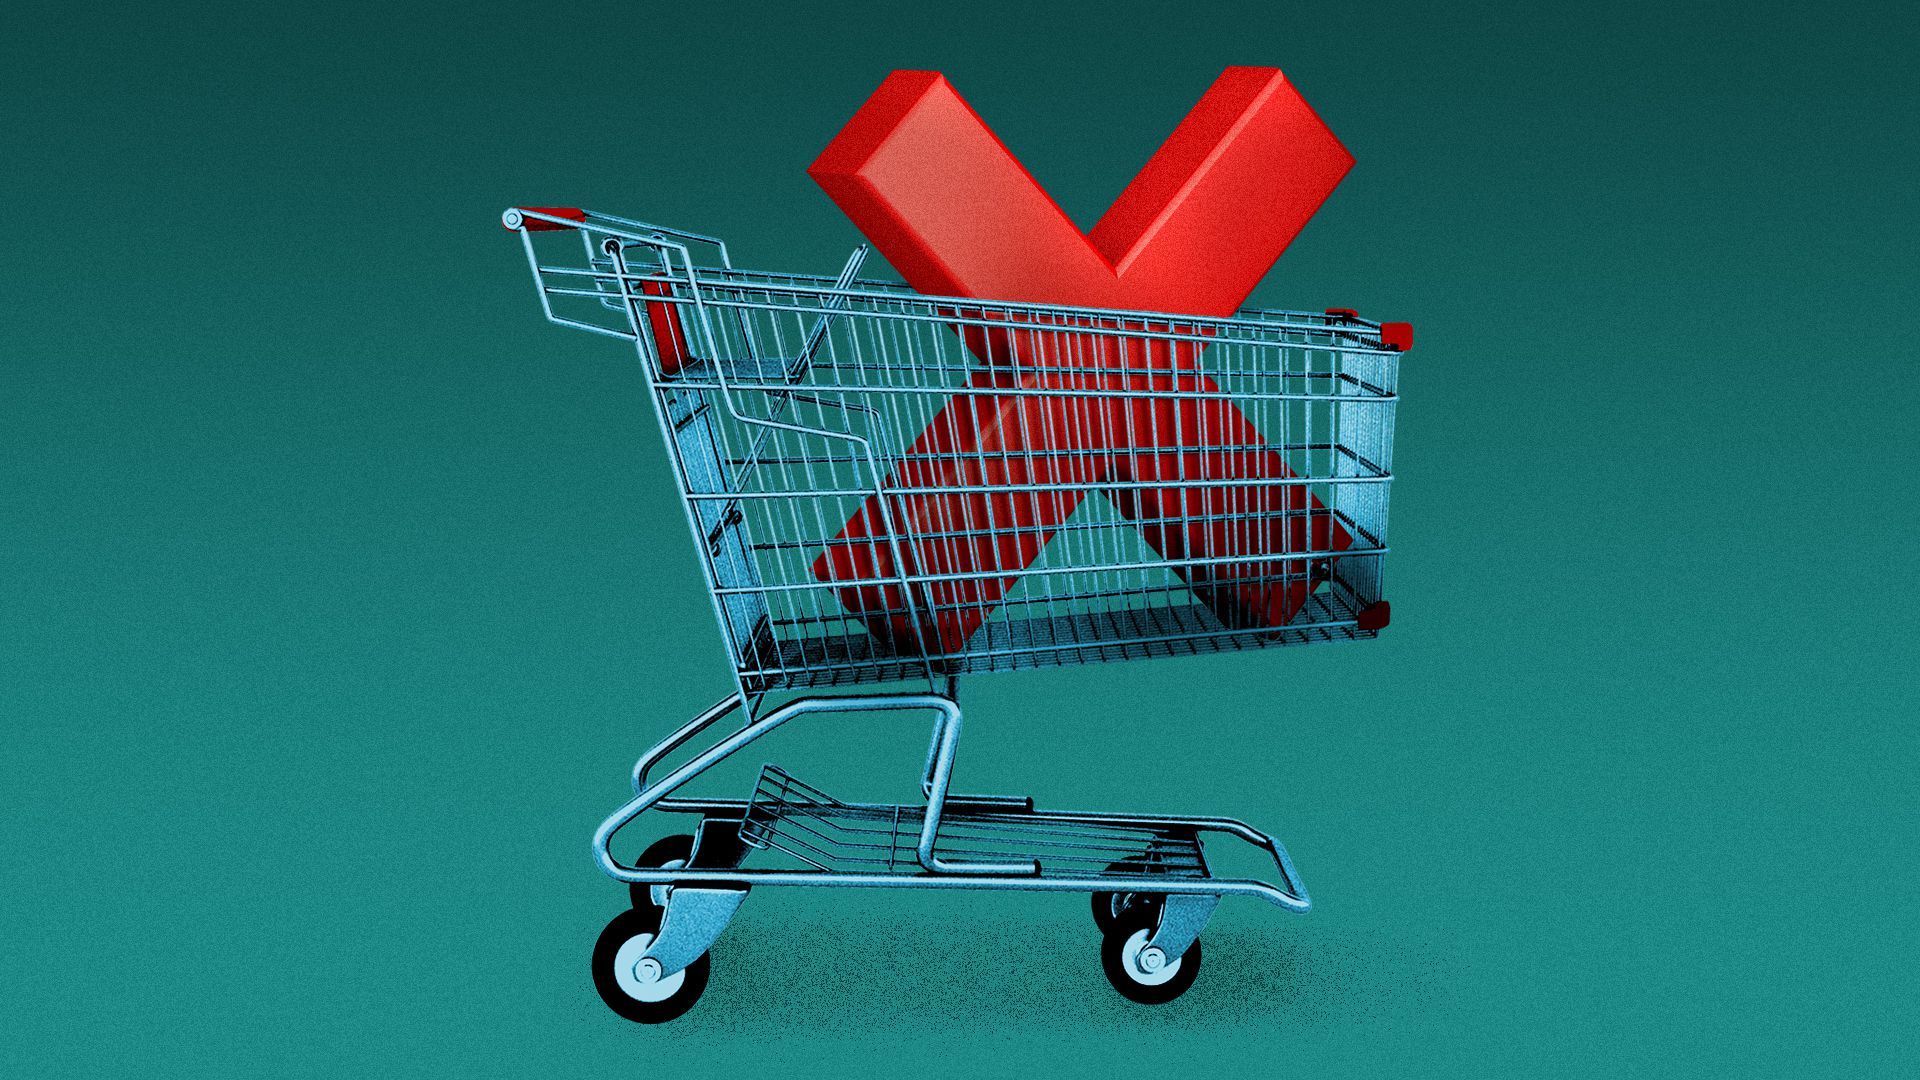 Illustration of a shopping cart with an "X".